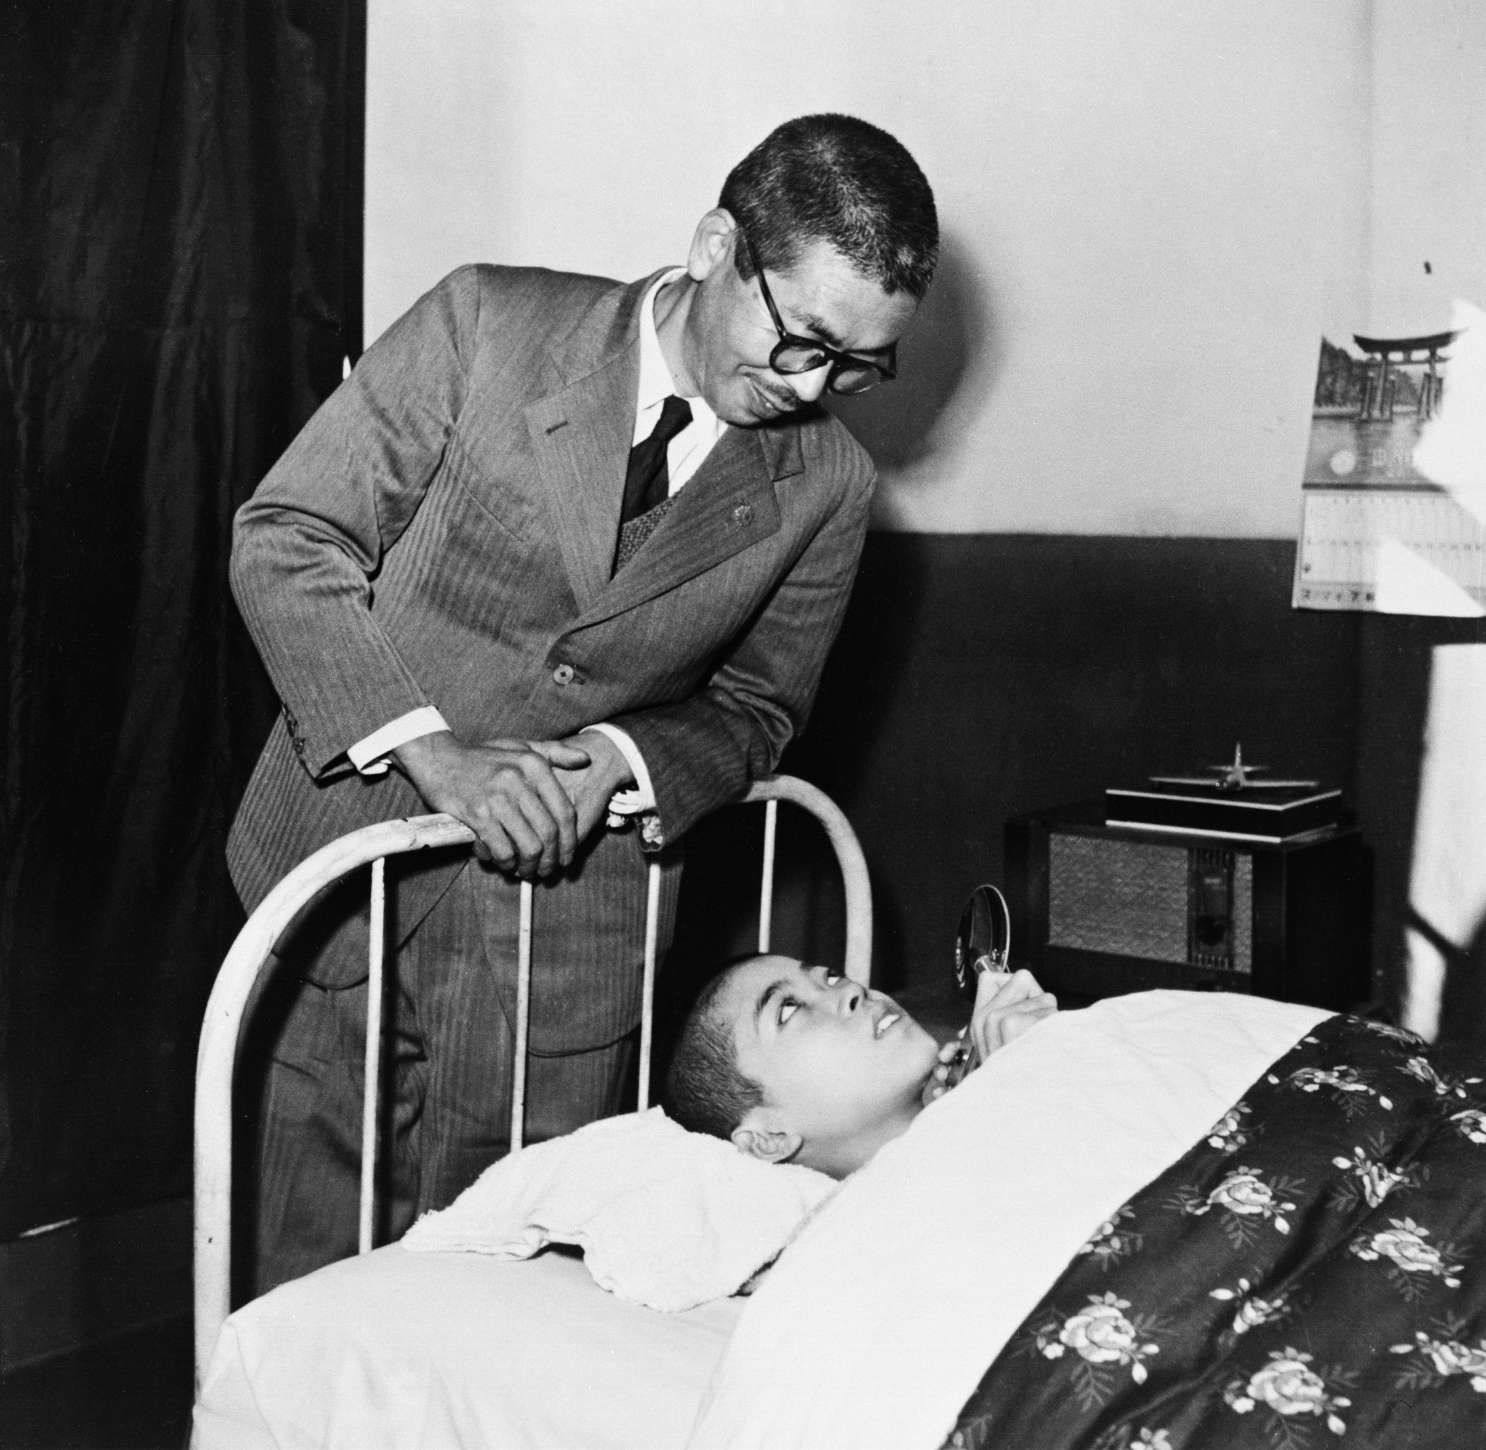 Shinjo, in a suit and glasses, leans over the head of a hospital bed, smiling at his teenage son Yuichi, who looks up from beneath a heavy comforter.